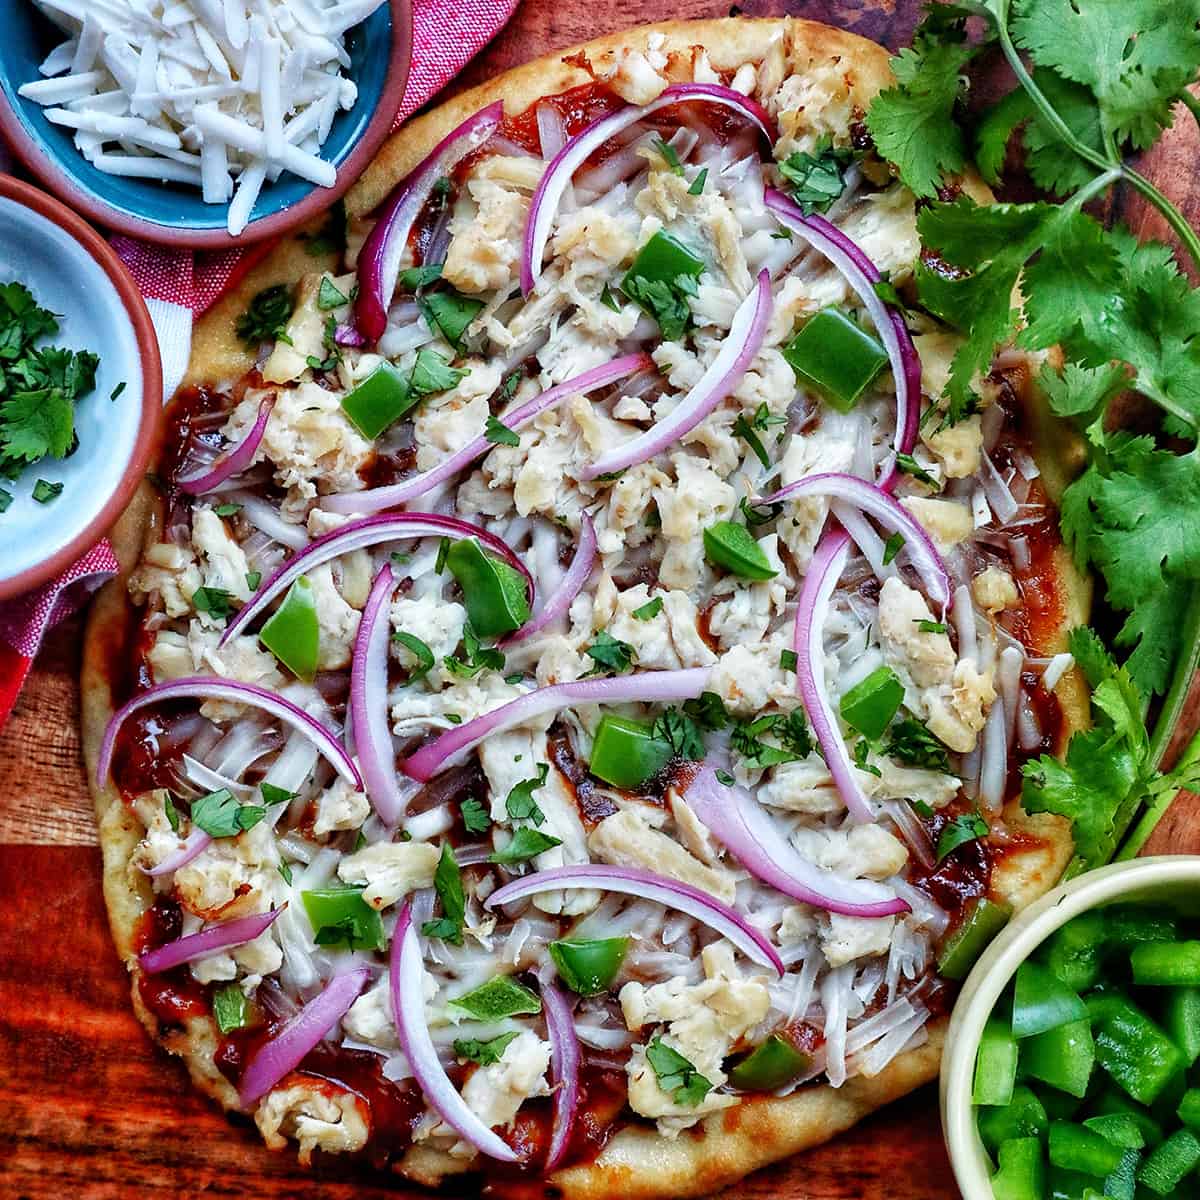 barbecue chicken flatbread pizza on a wooden board with sides of cheese and chopped cilantro for garnish.